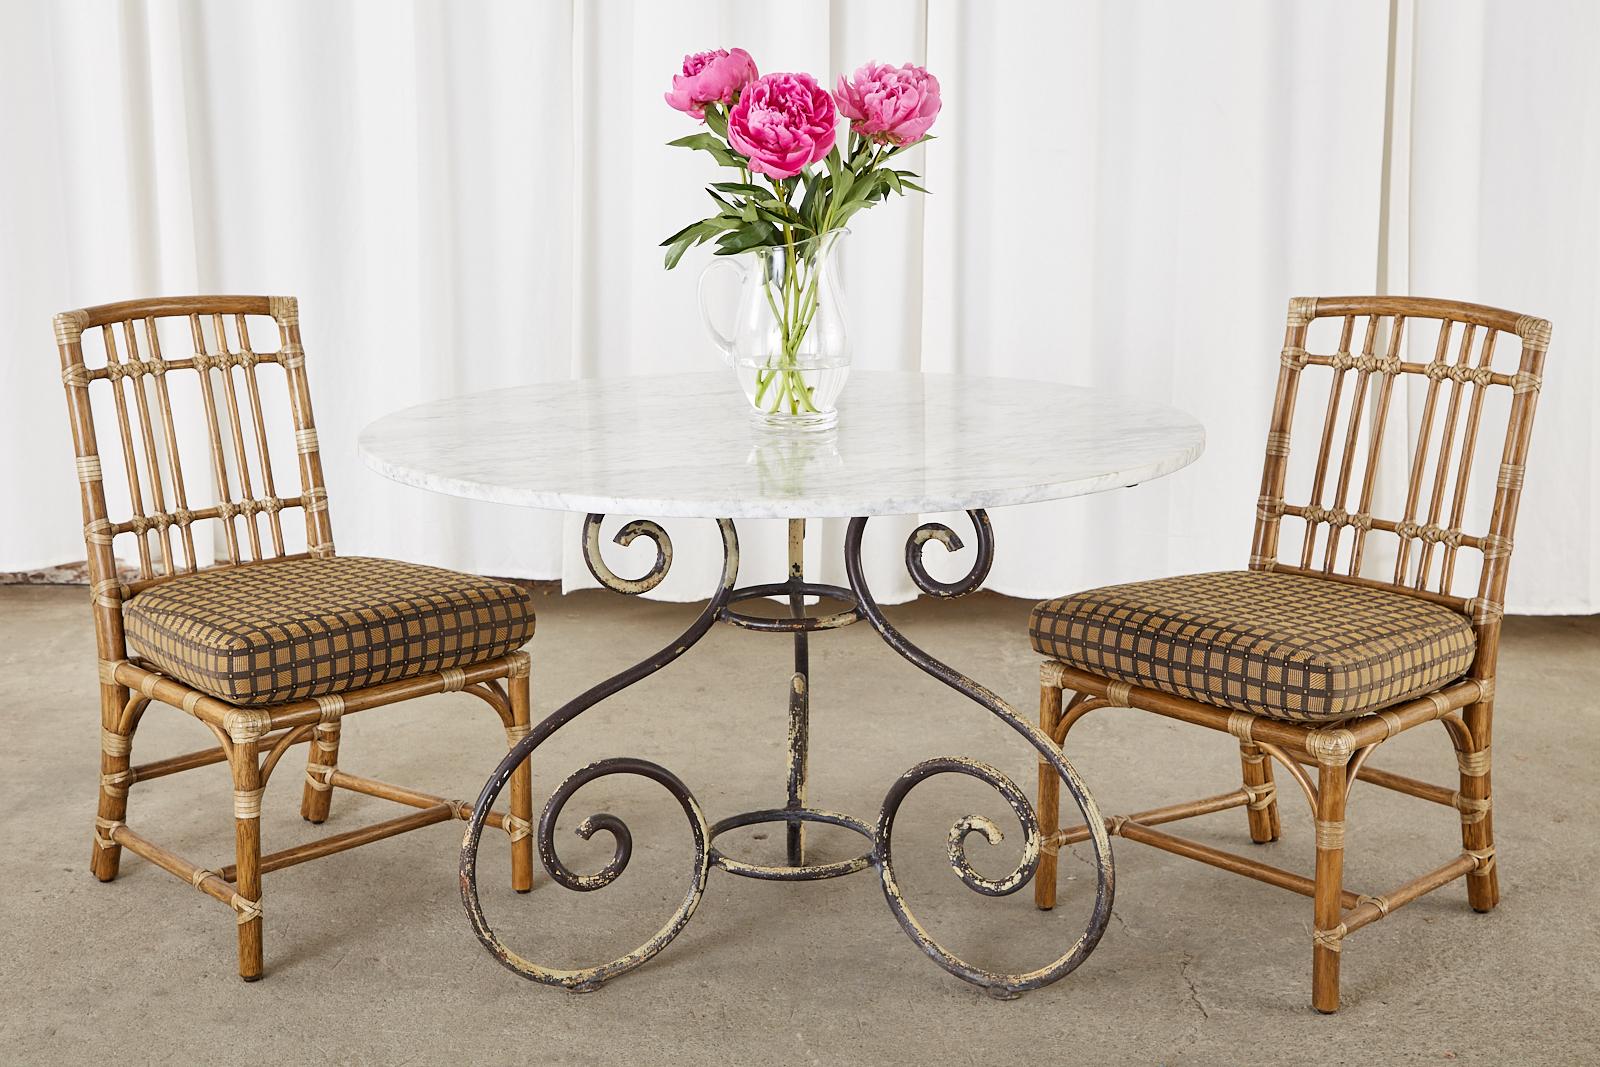 Extraordinary French art nouveau garden dining table or centre table featuring a 1 inch thick round Carrara marble top. The top is supported by a three leg iron base conjoined in the middle with ring stretchers. The legs are crafted from solid iron